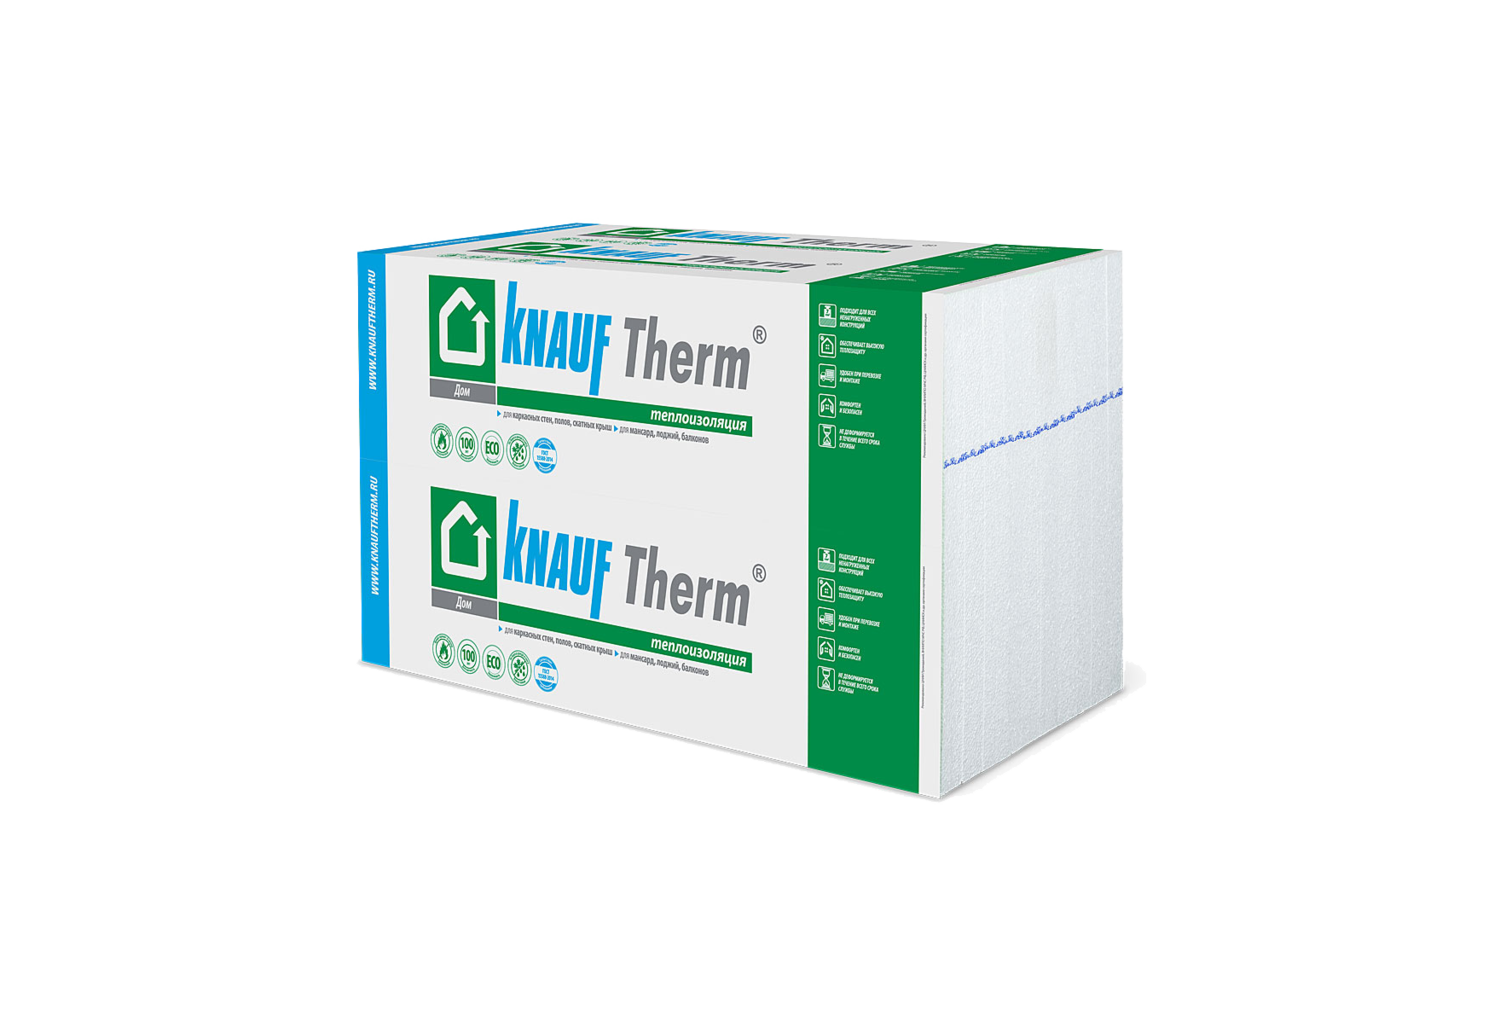 <span style="font-weight: bold;">KNAUF Therm® дом</span><br>